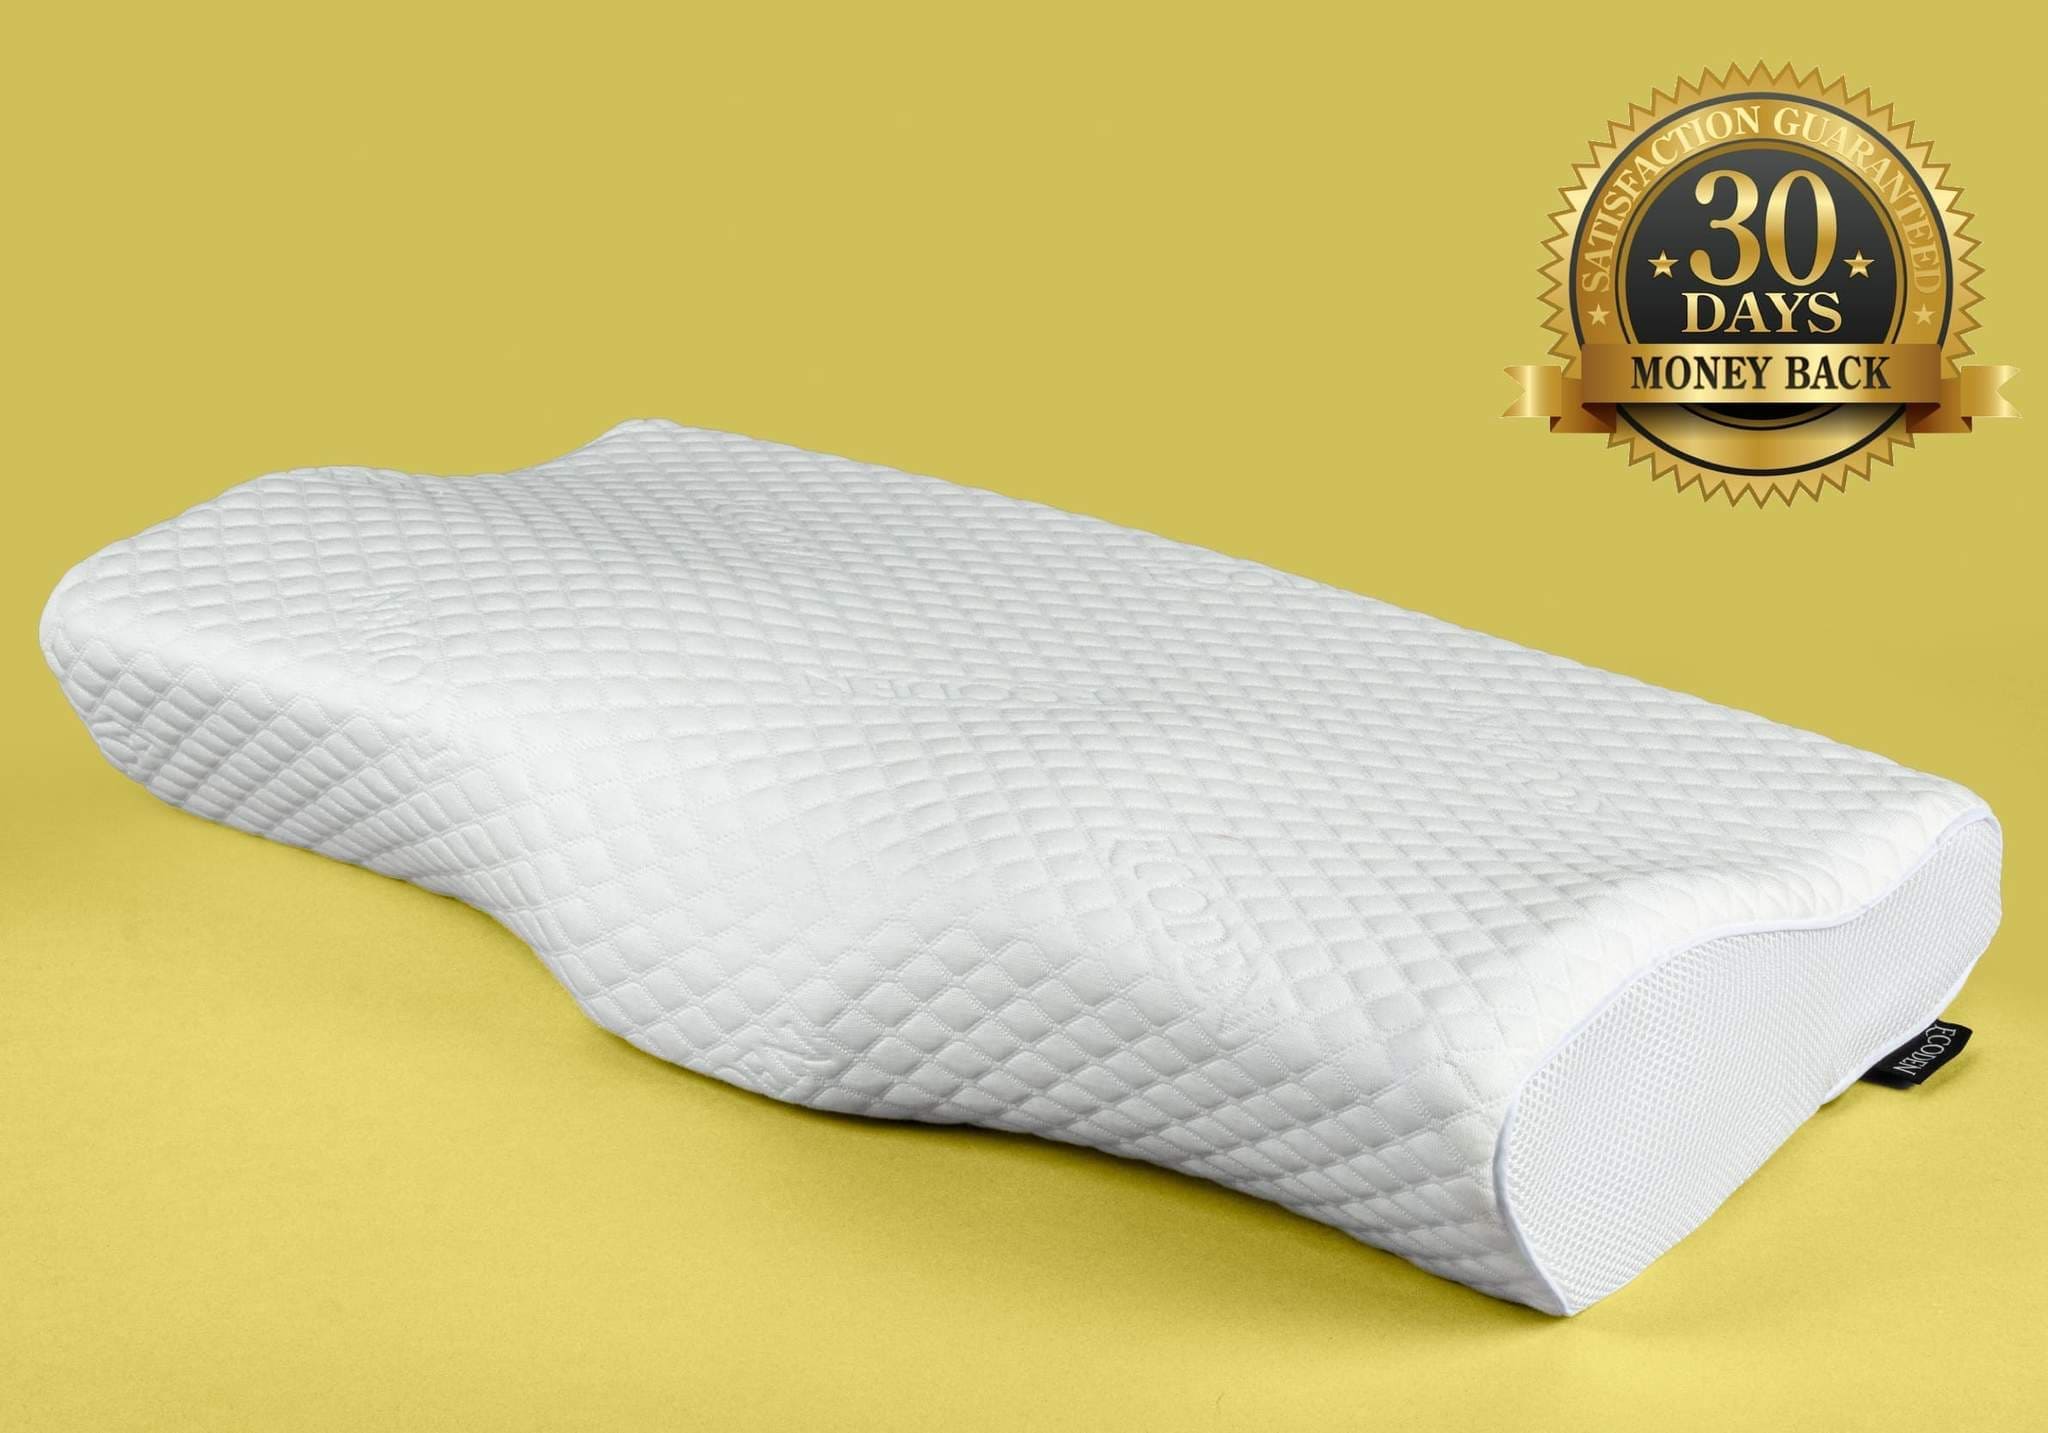 Groove Pillow review: firm support that reduces aches & aligns the